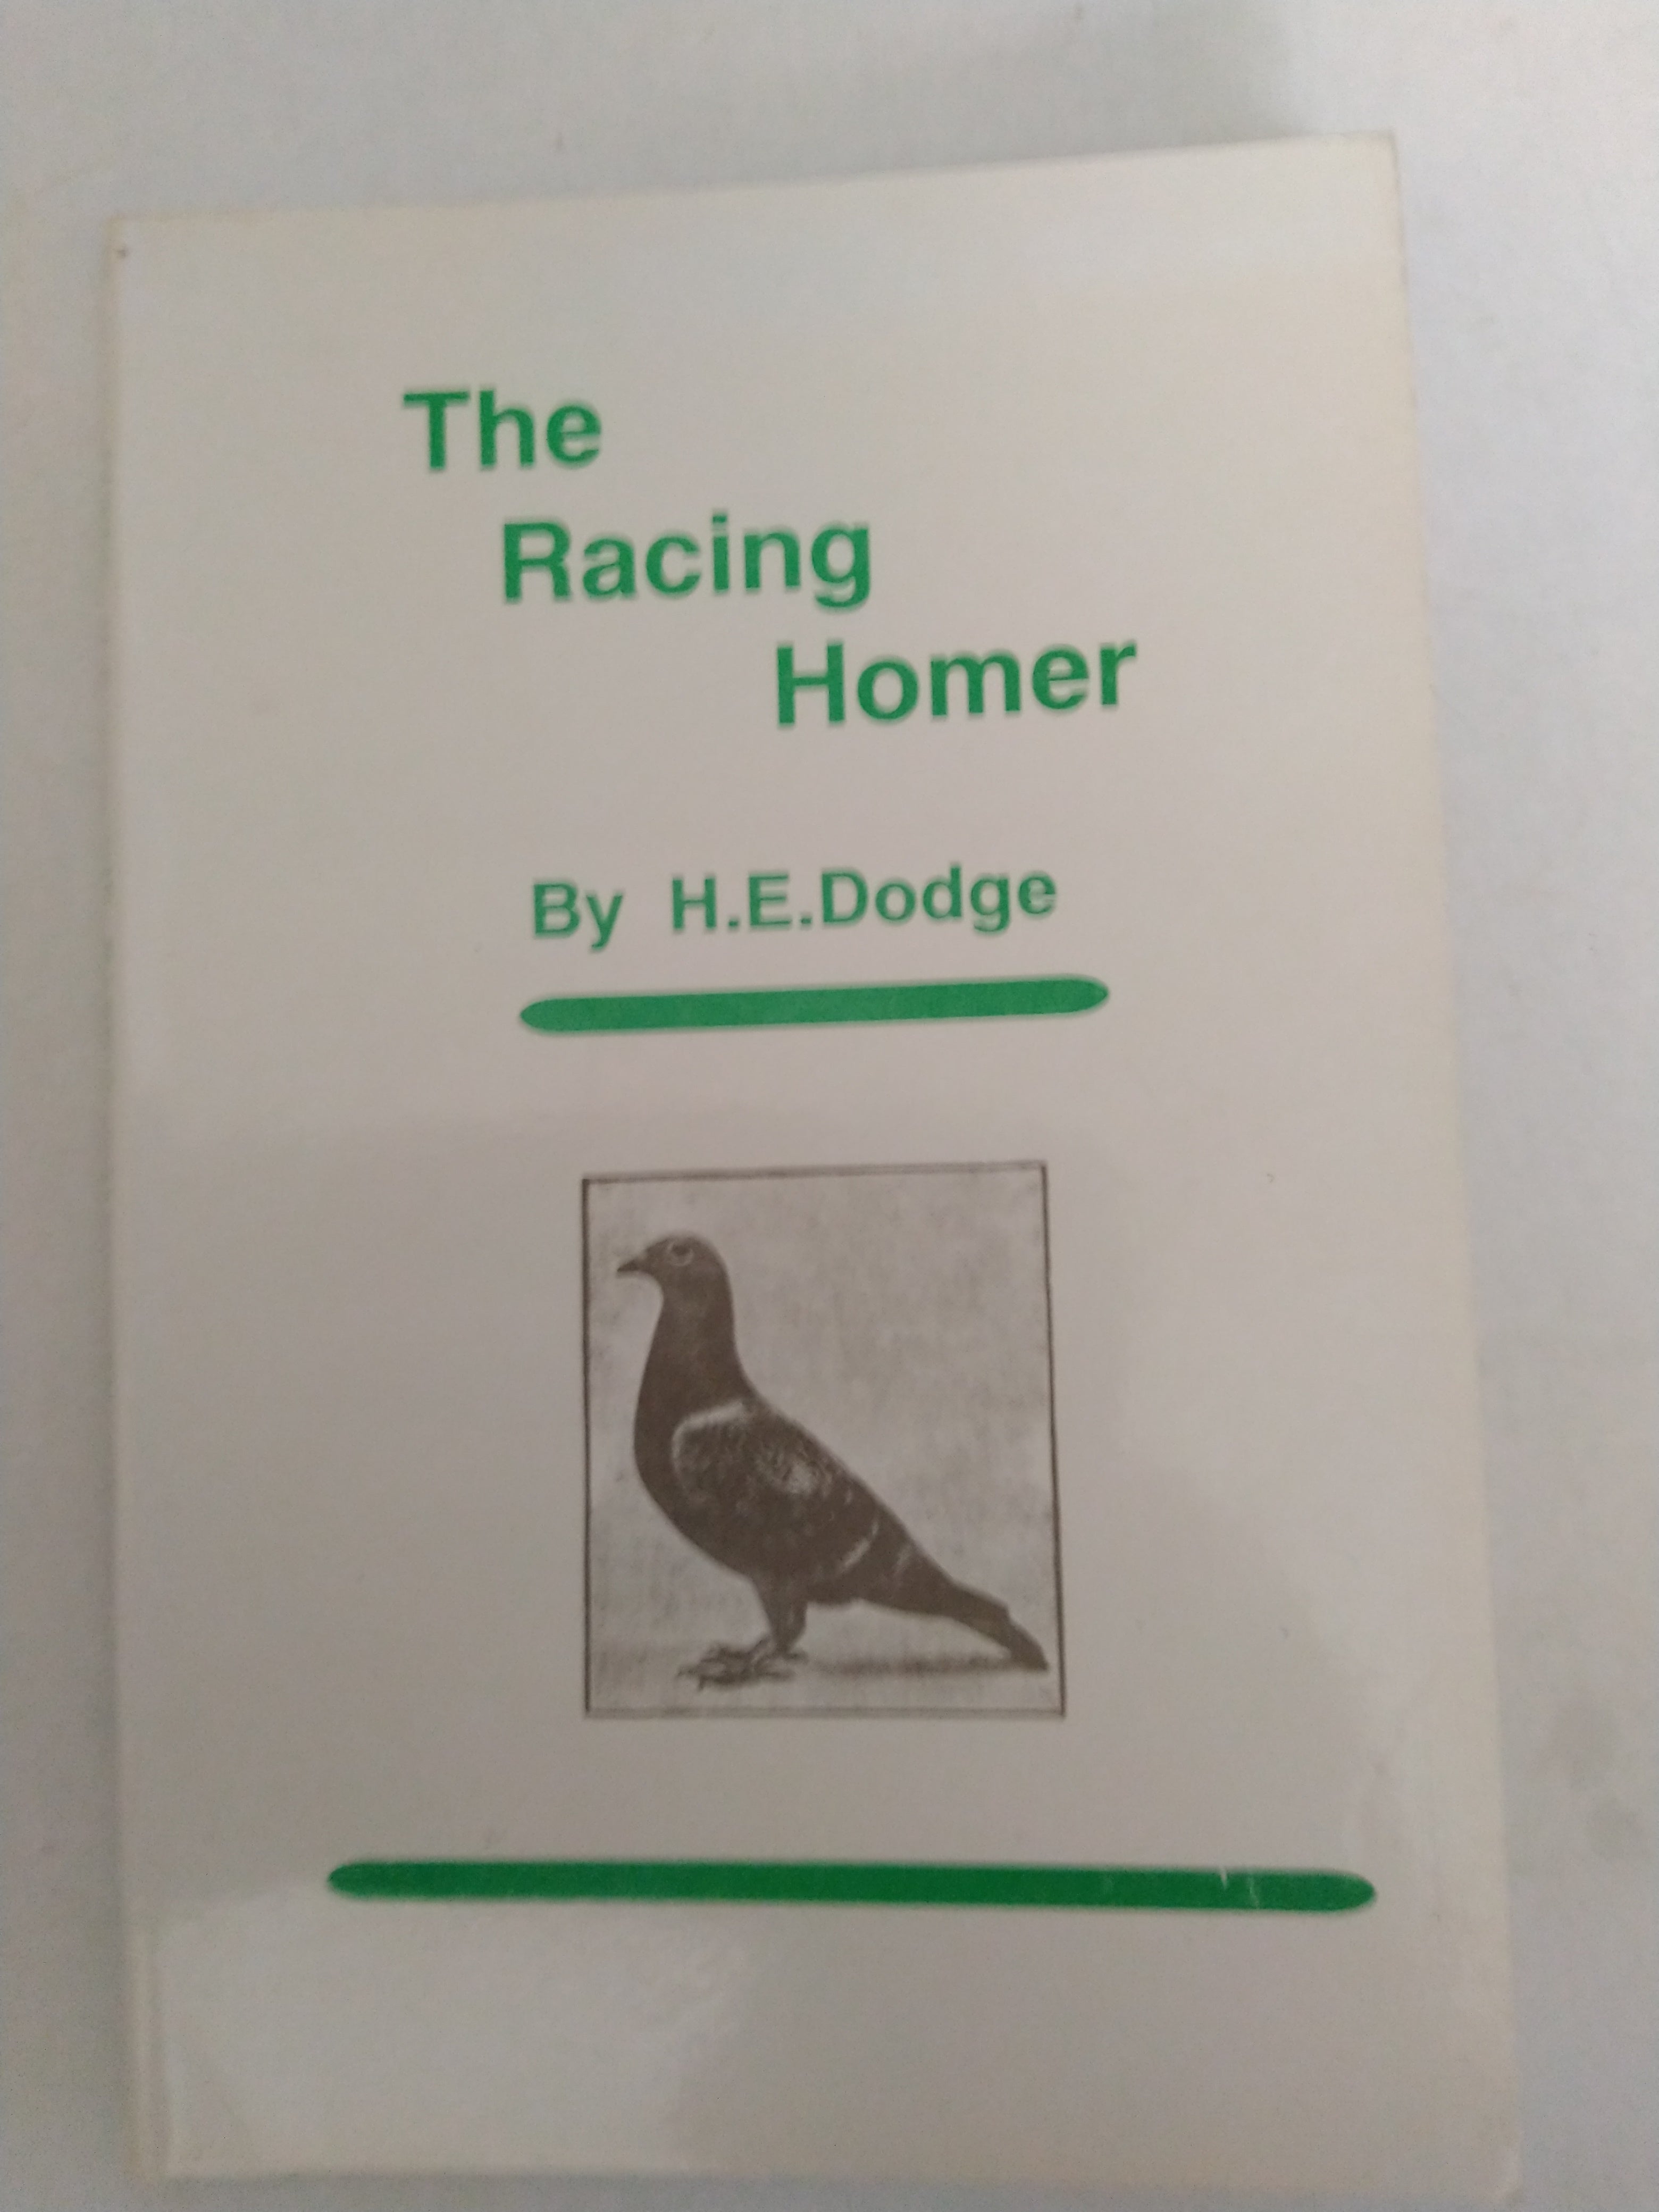 The Racing Homer By H.E.Dodge Revised Edition by J. Barnes